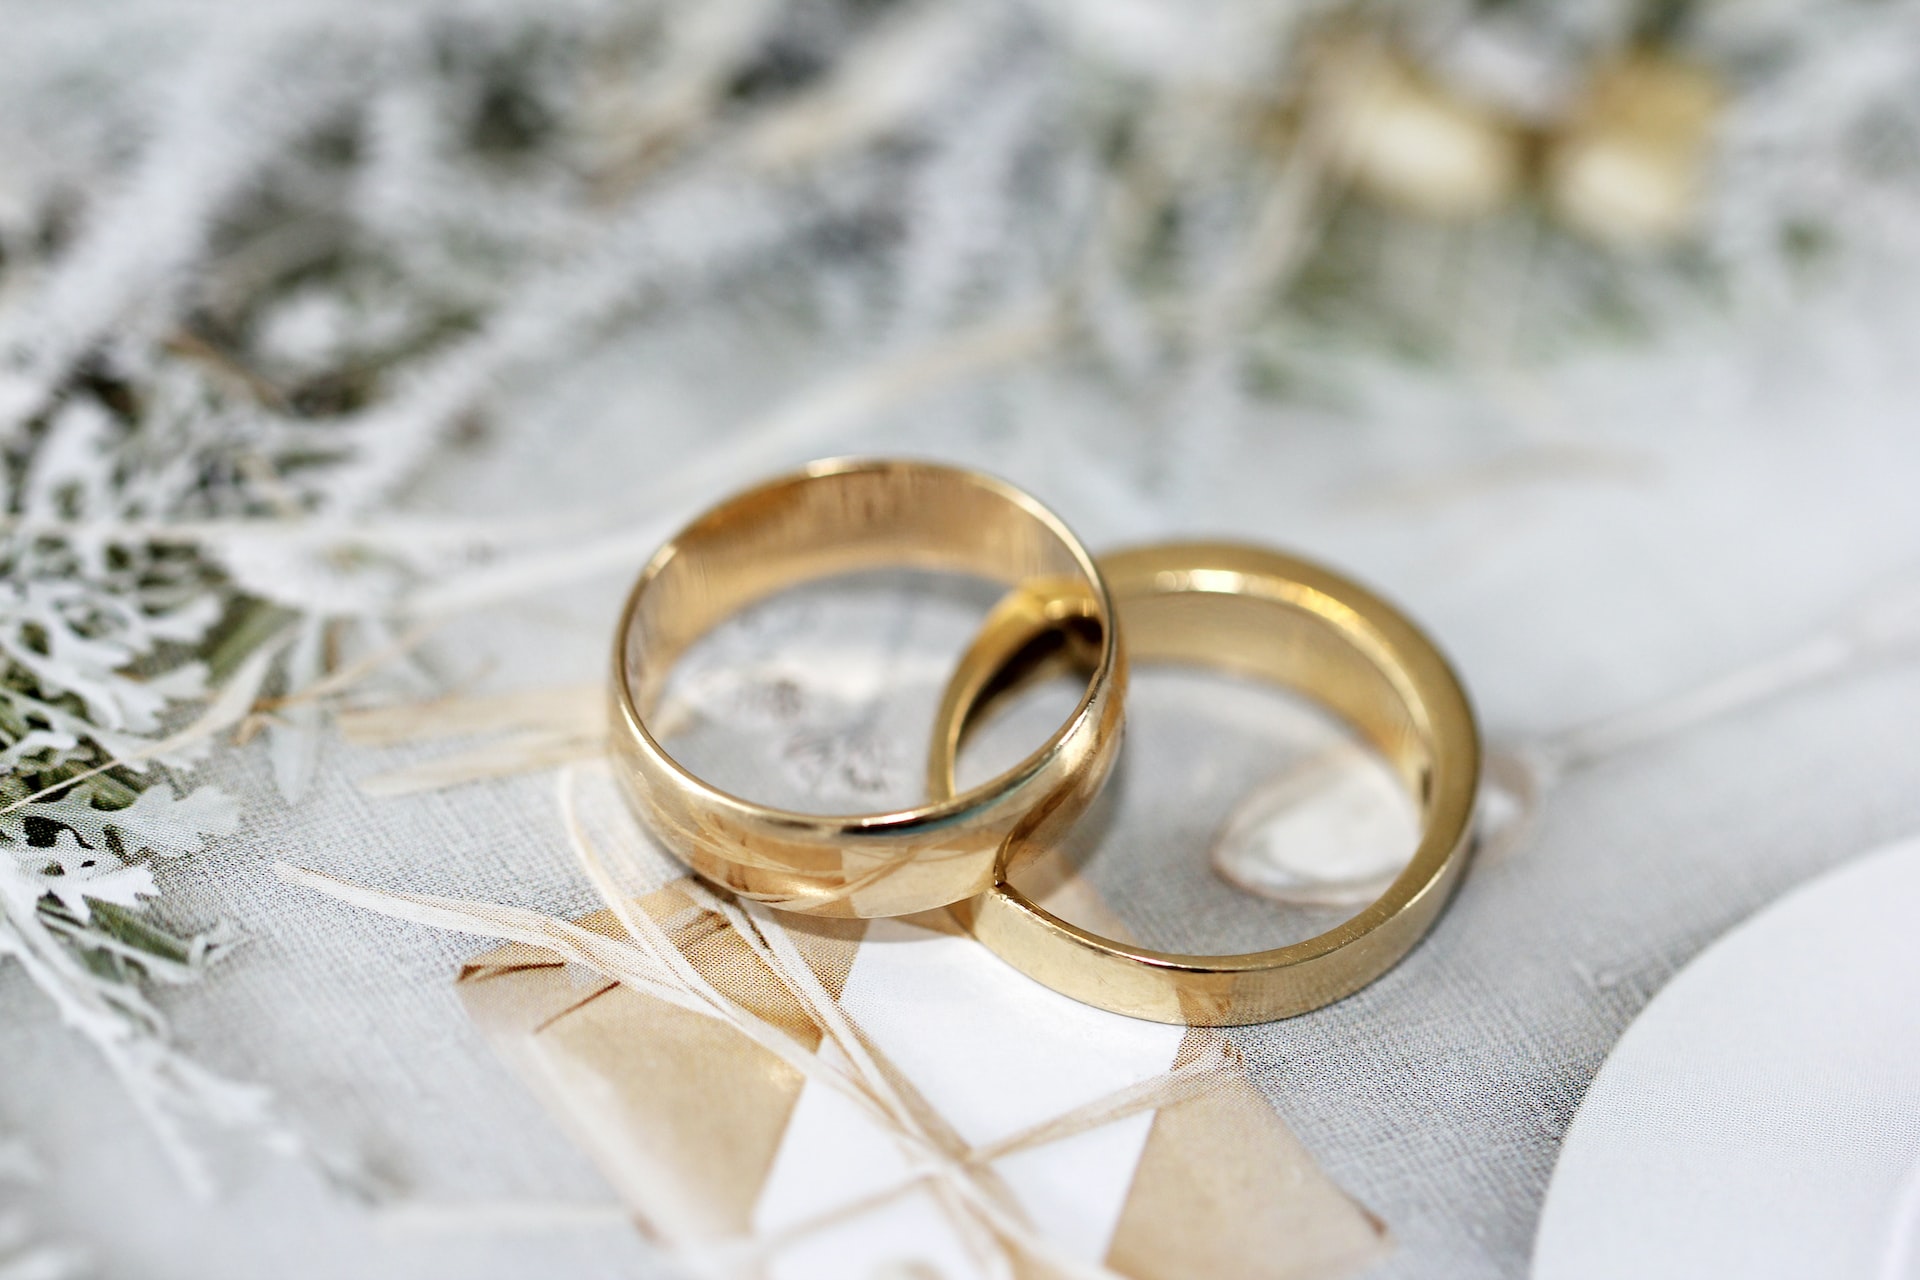 is a spouse entitled to personal injury settlement - gold wedding bands